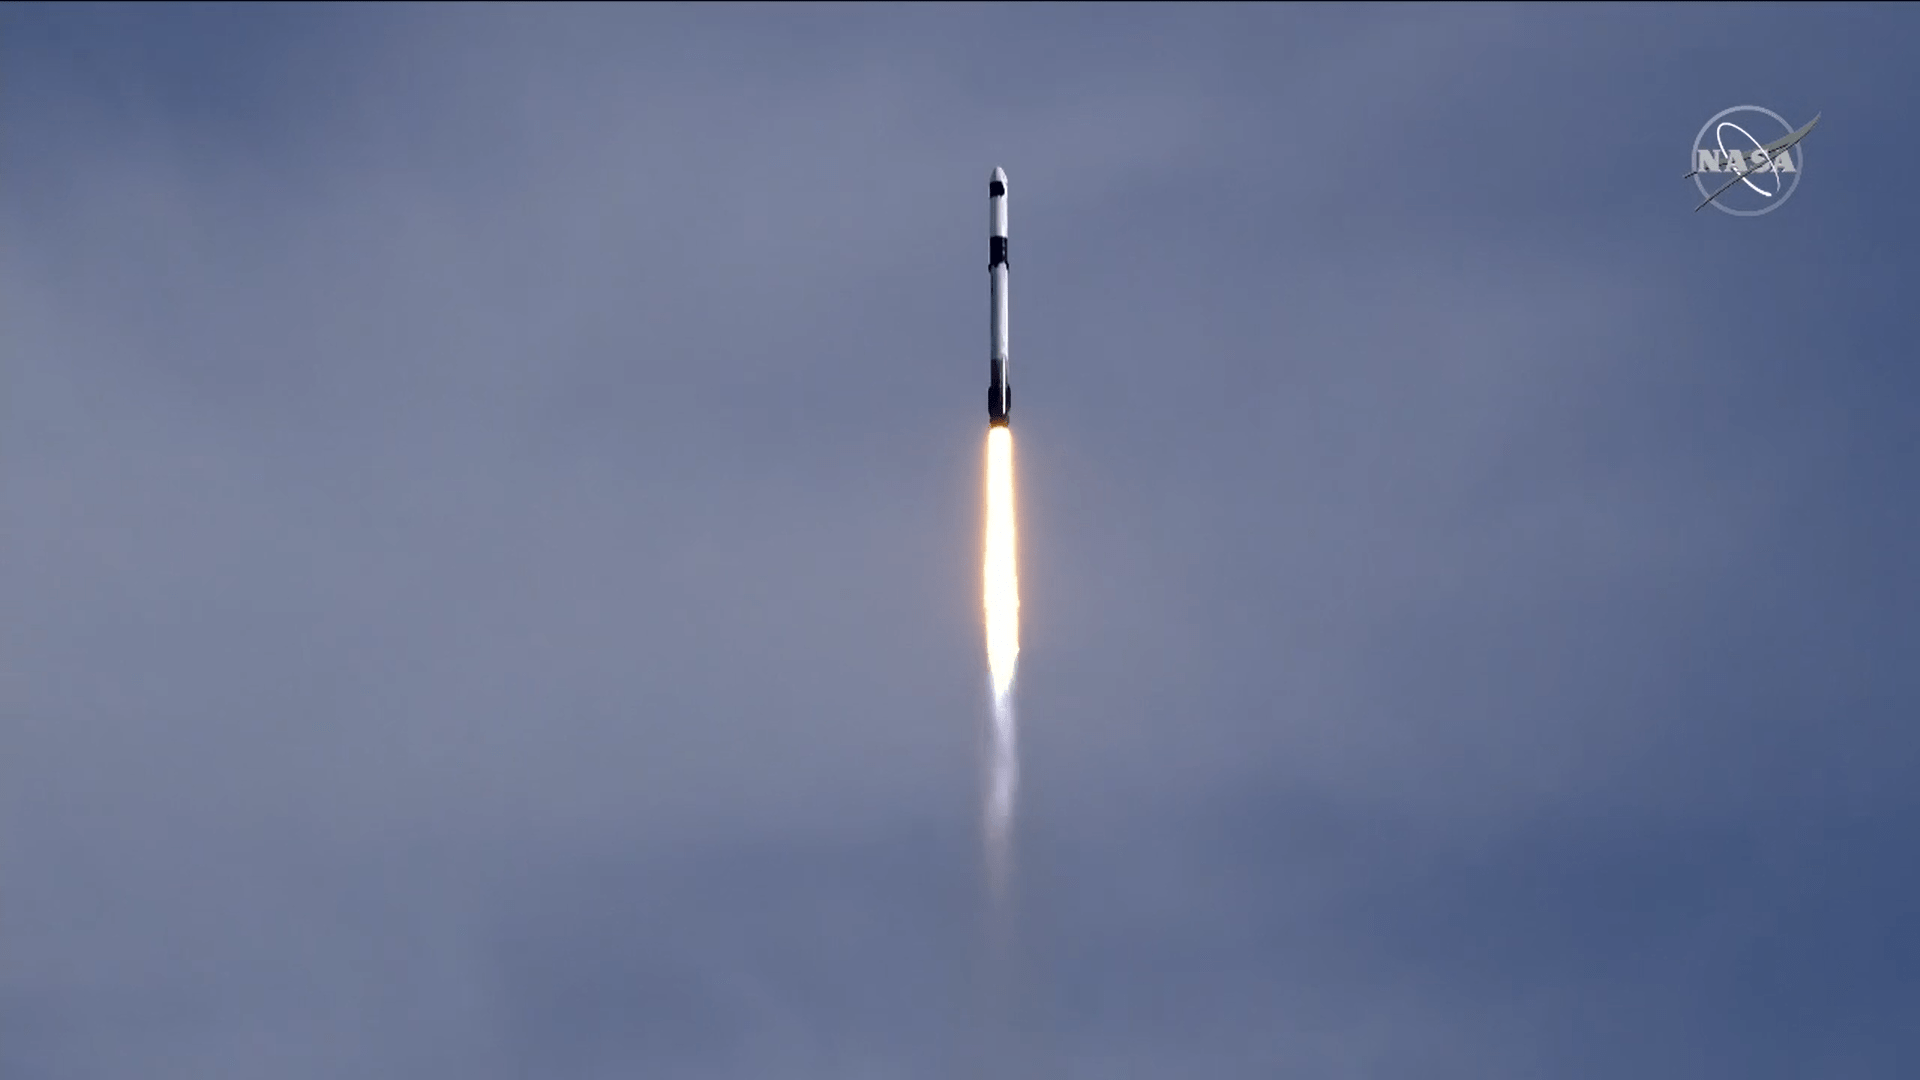 SpaceX launched its 21st commercial resupply mission to the International Space Station at 11:17 a.m. EST Dec. 6, 2020.